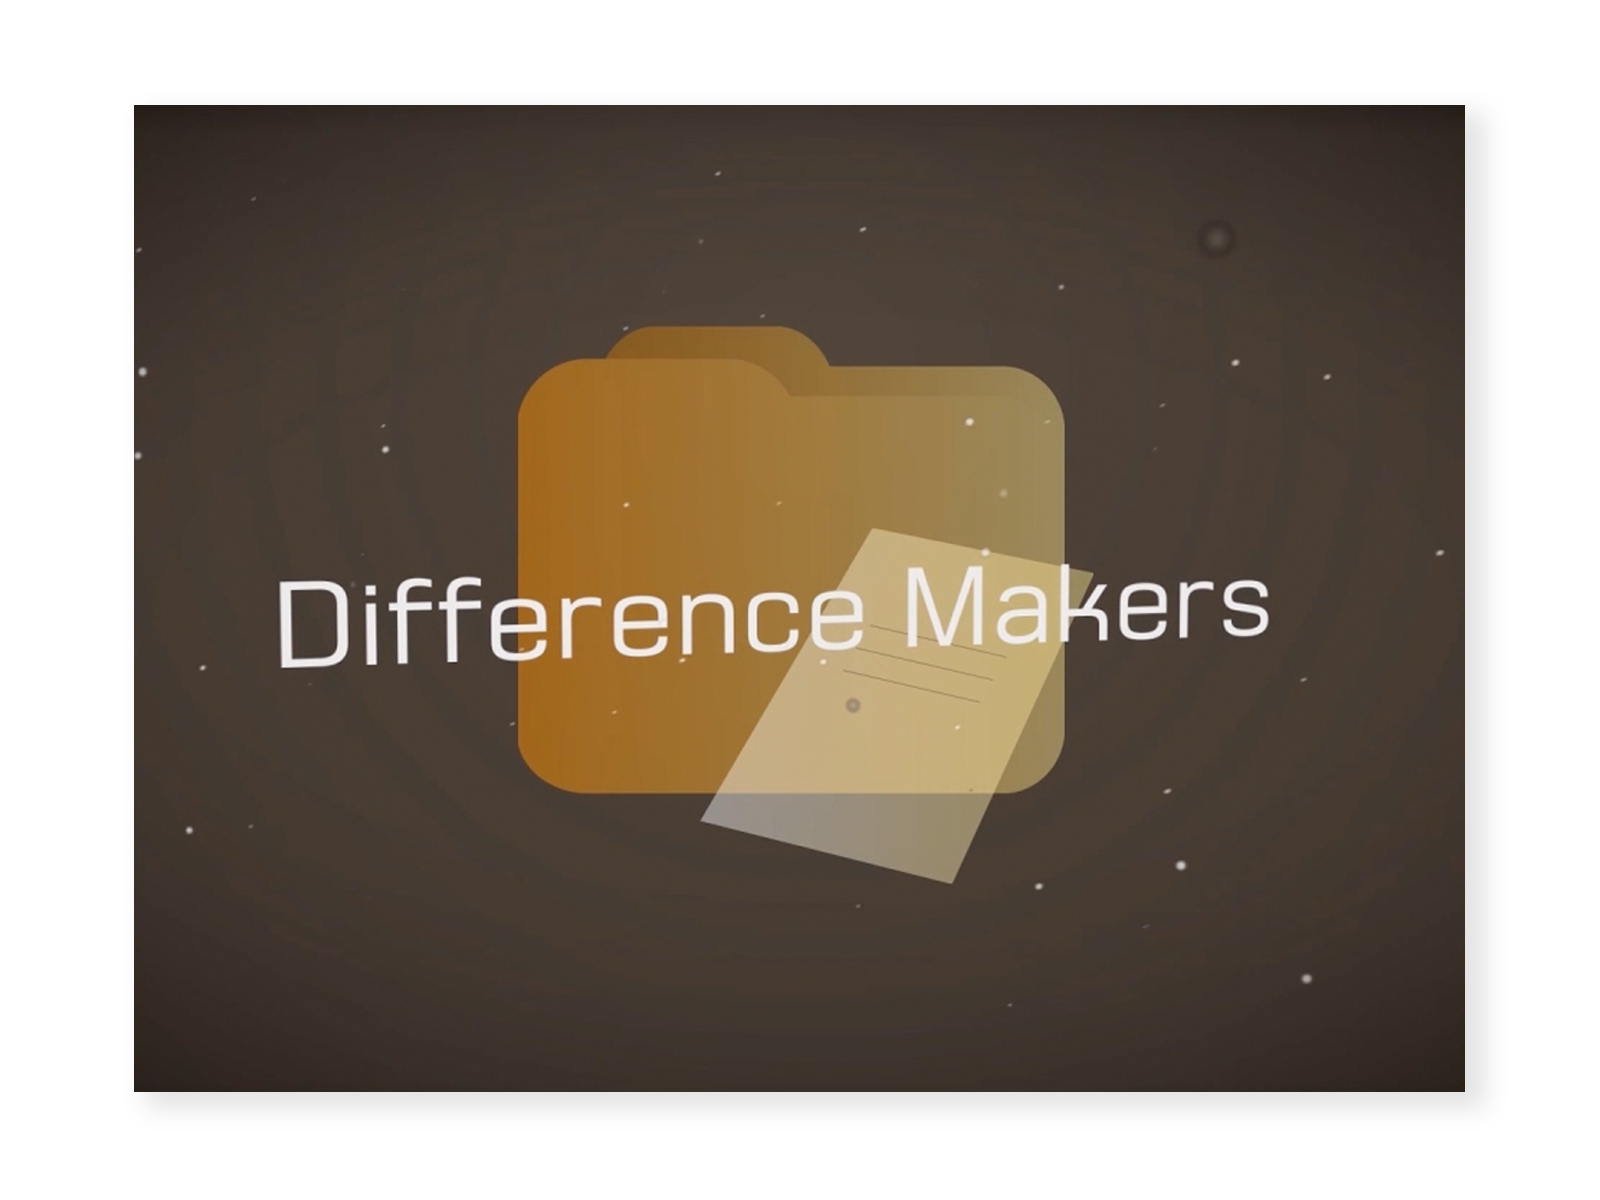 Screenshot from "What is a Difference Maker?" video - brown background with a graphic of a file folder and a sheet of paper. The words "Difference Makers" is overlayed.